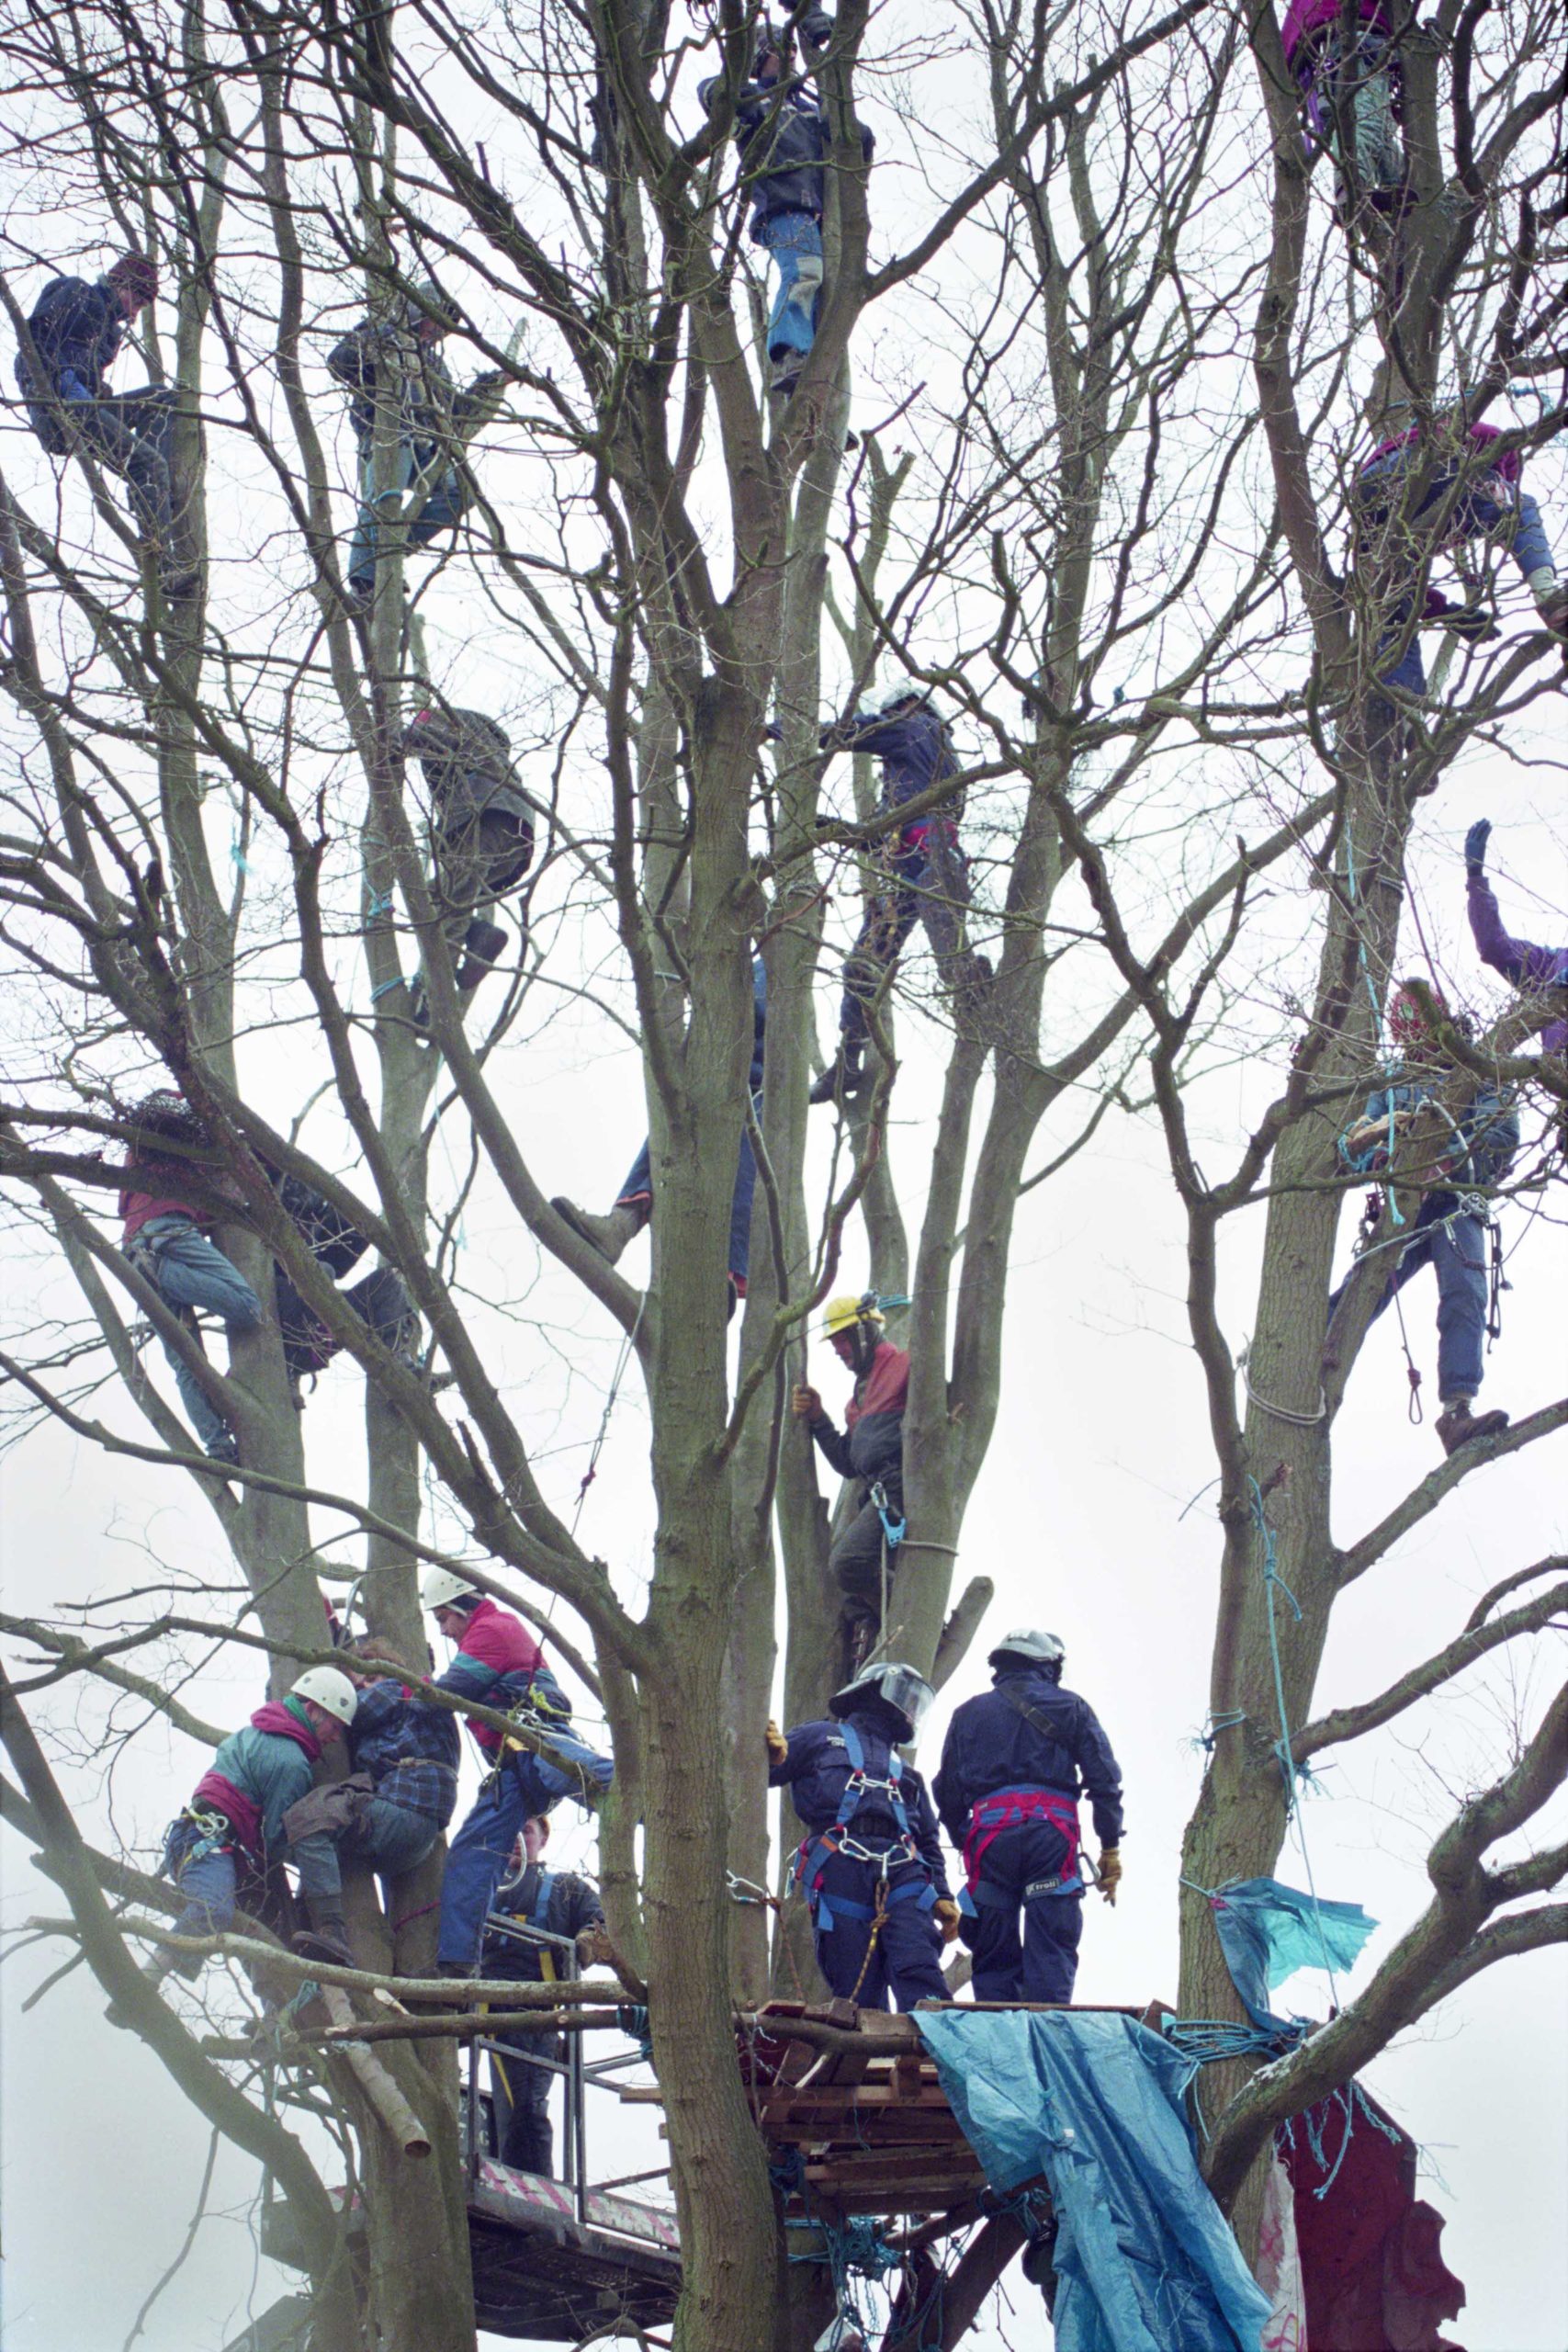 A group of protesters climb up high branches of a tree as security guards try to remove them. Historical photograph